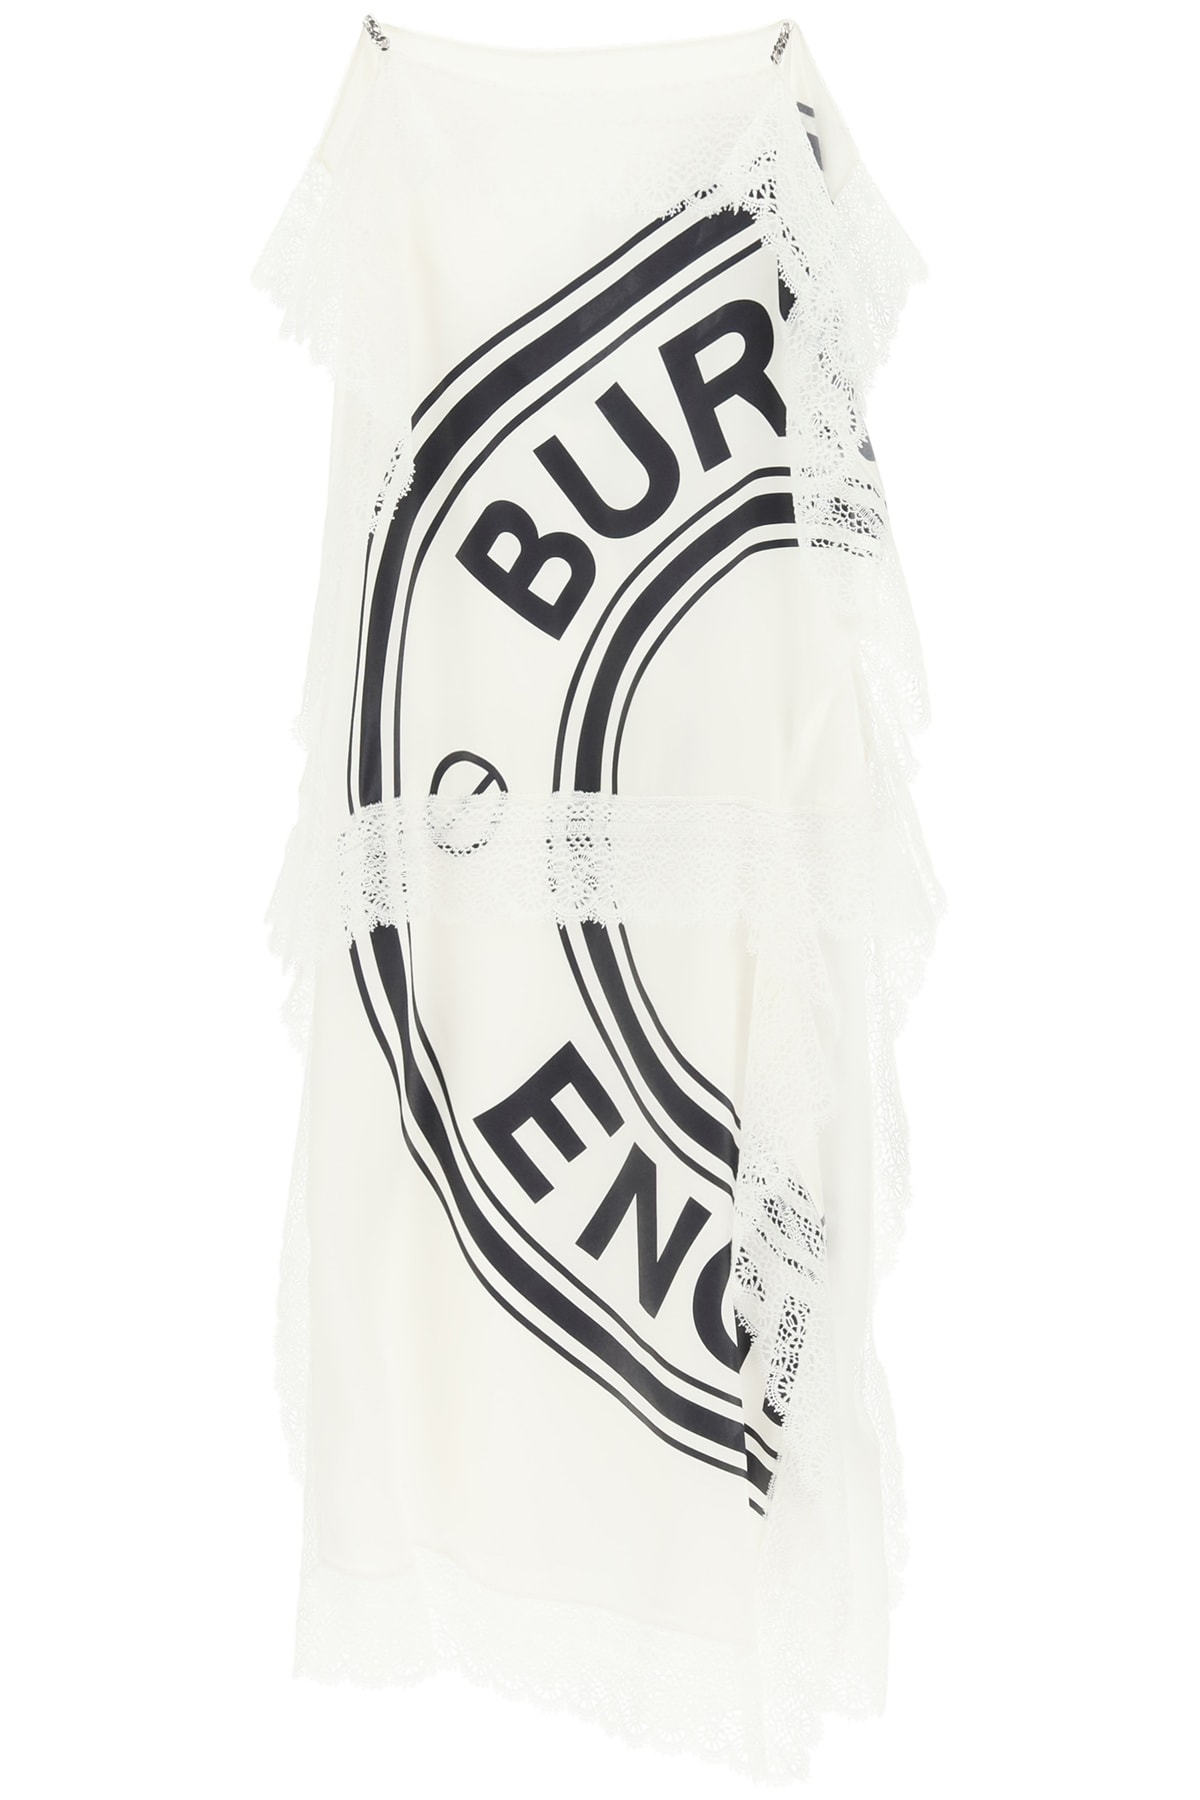 BURBERRY LOGO PRINT DRESS WITH LACE,11834270